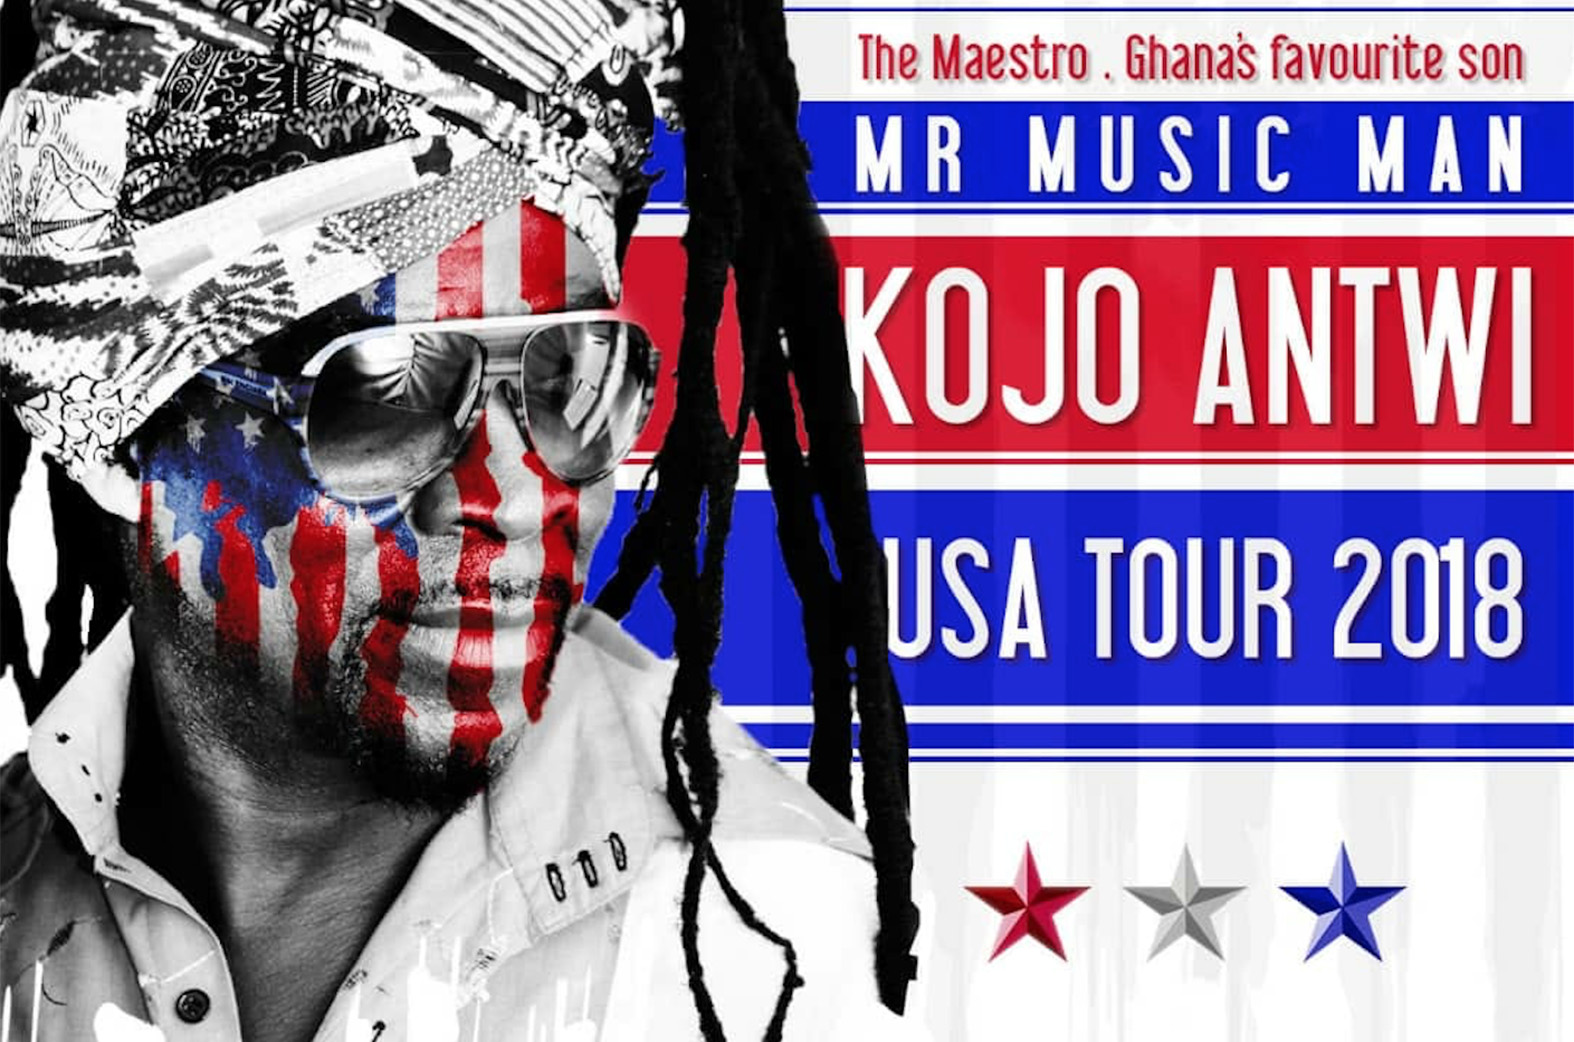 Brand Africa Group & Berks Concepts presents ‘The Maestro Tour’